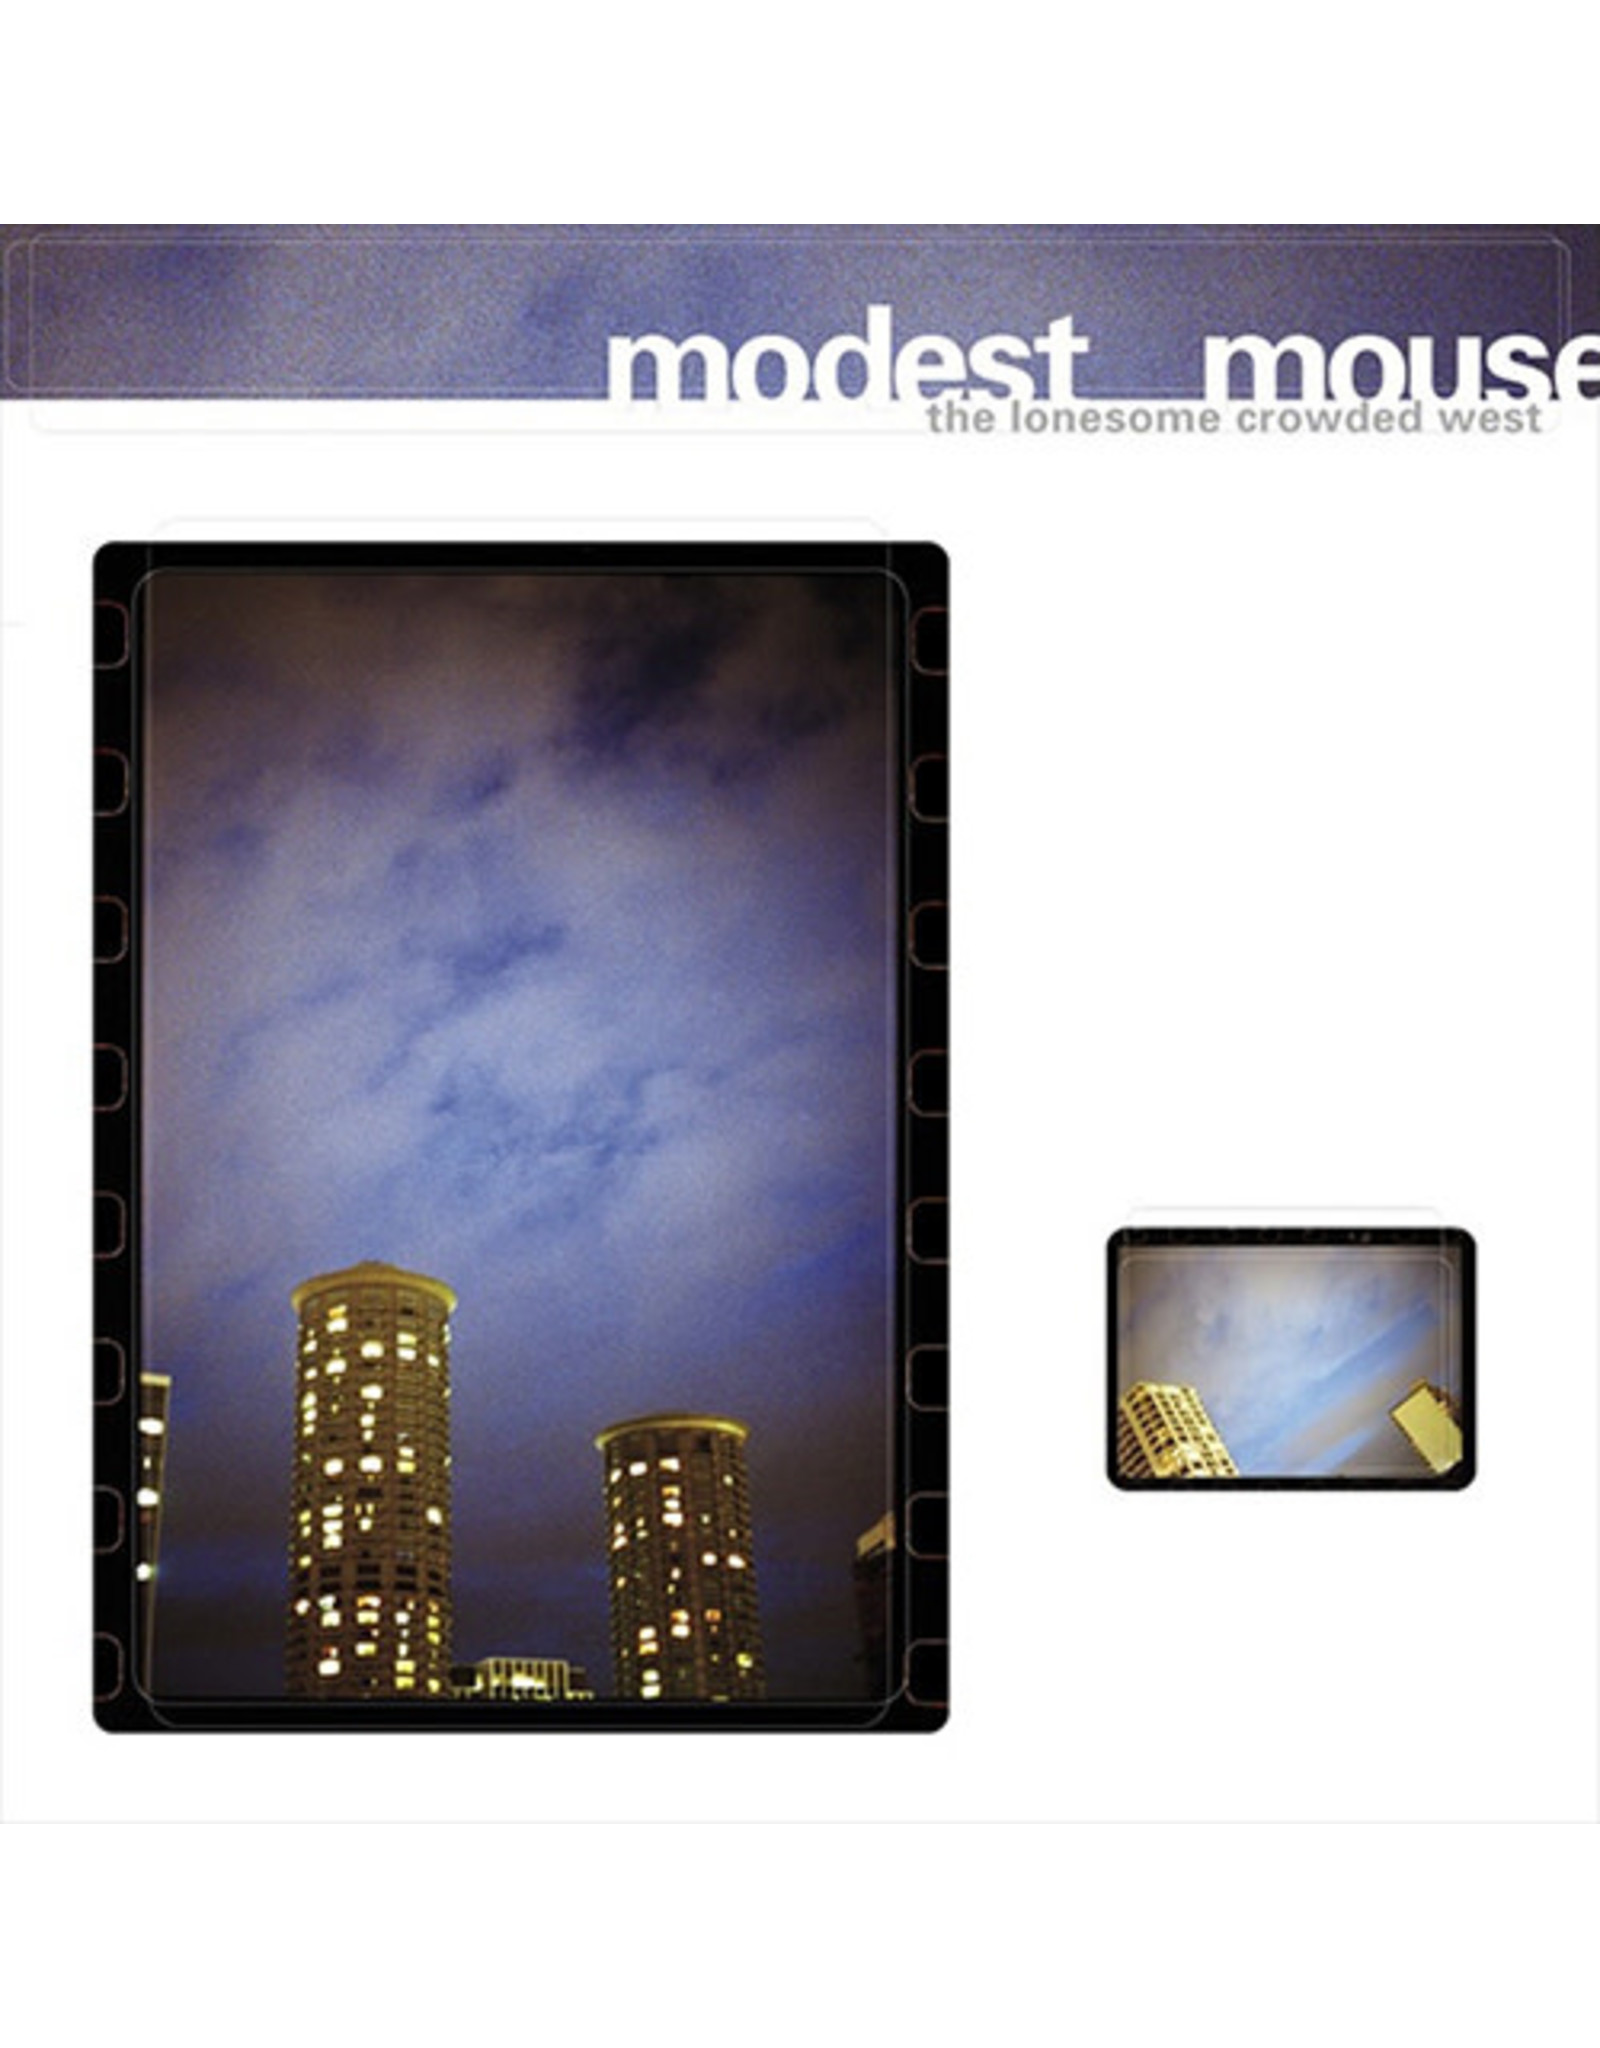 Glacial Pace Modest Mouse: The Lonesome Crowded West LP